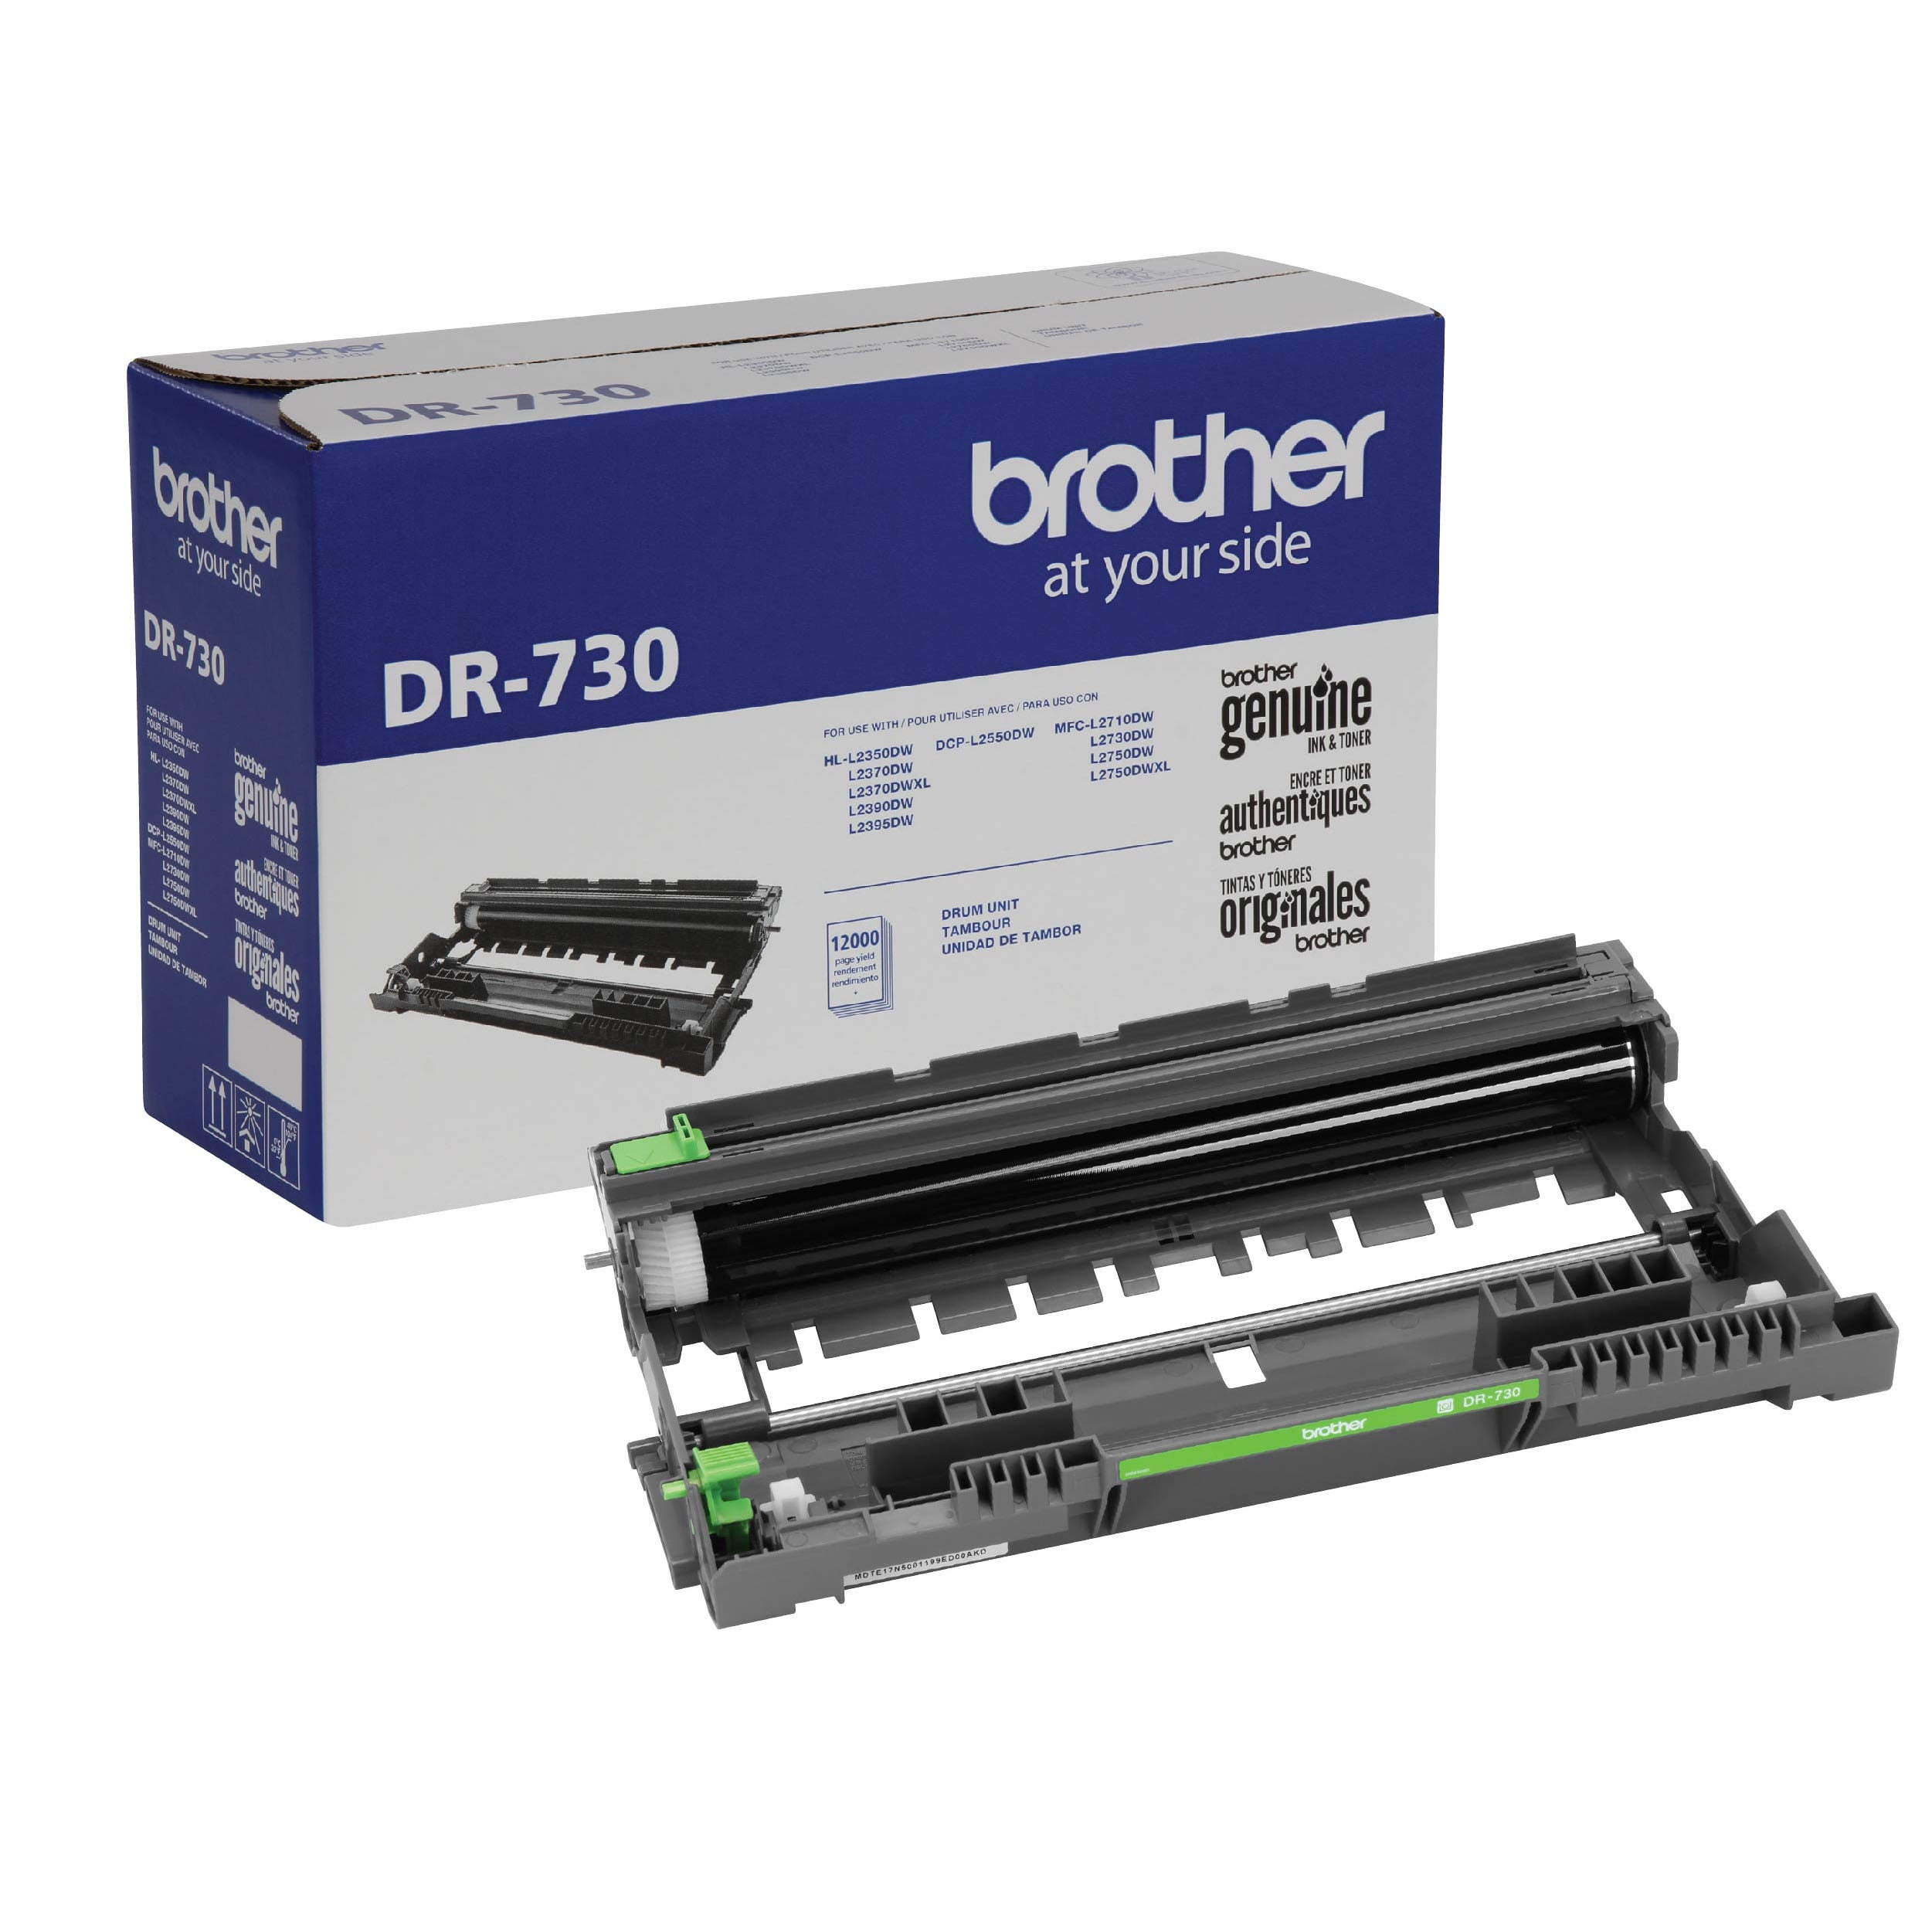 Bundles of non-OEM B3480 Toners and B3400 Drums for Brother 